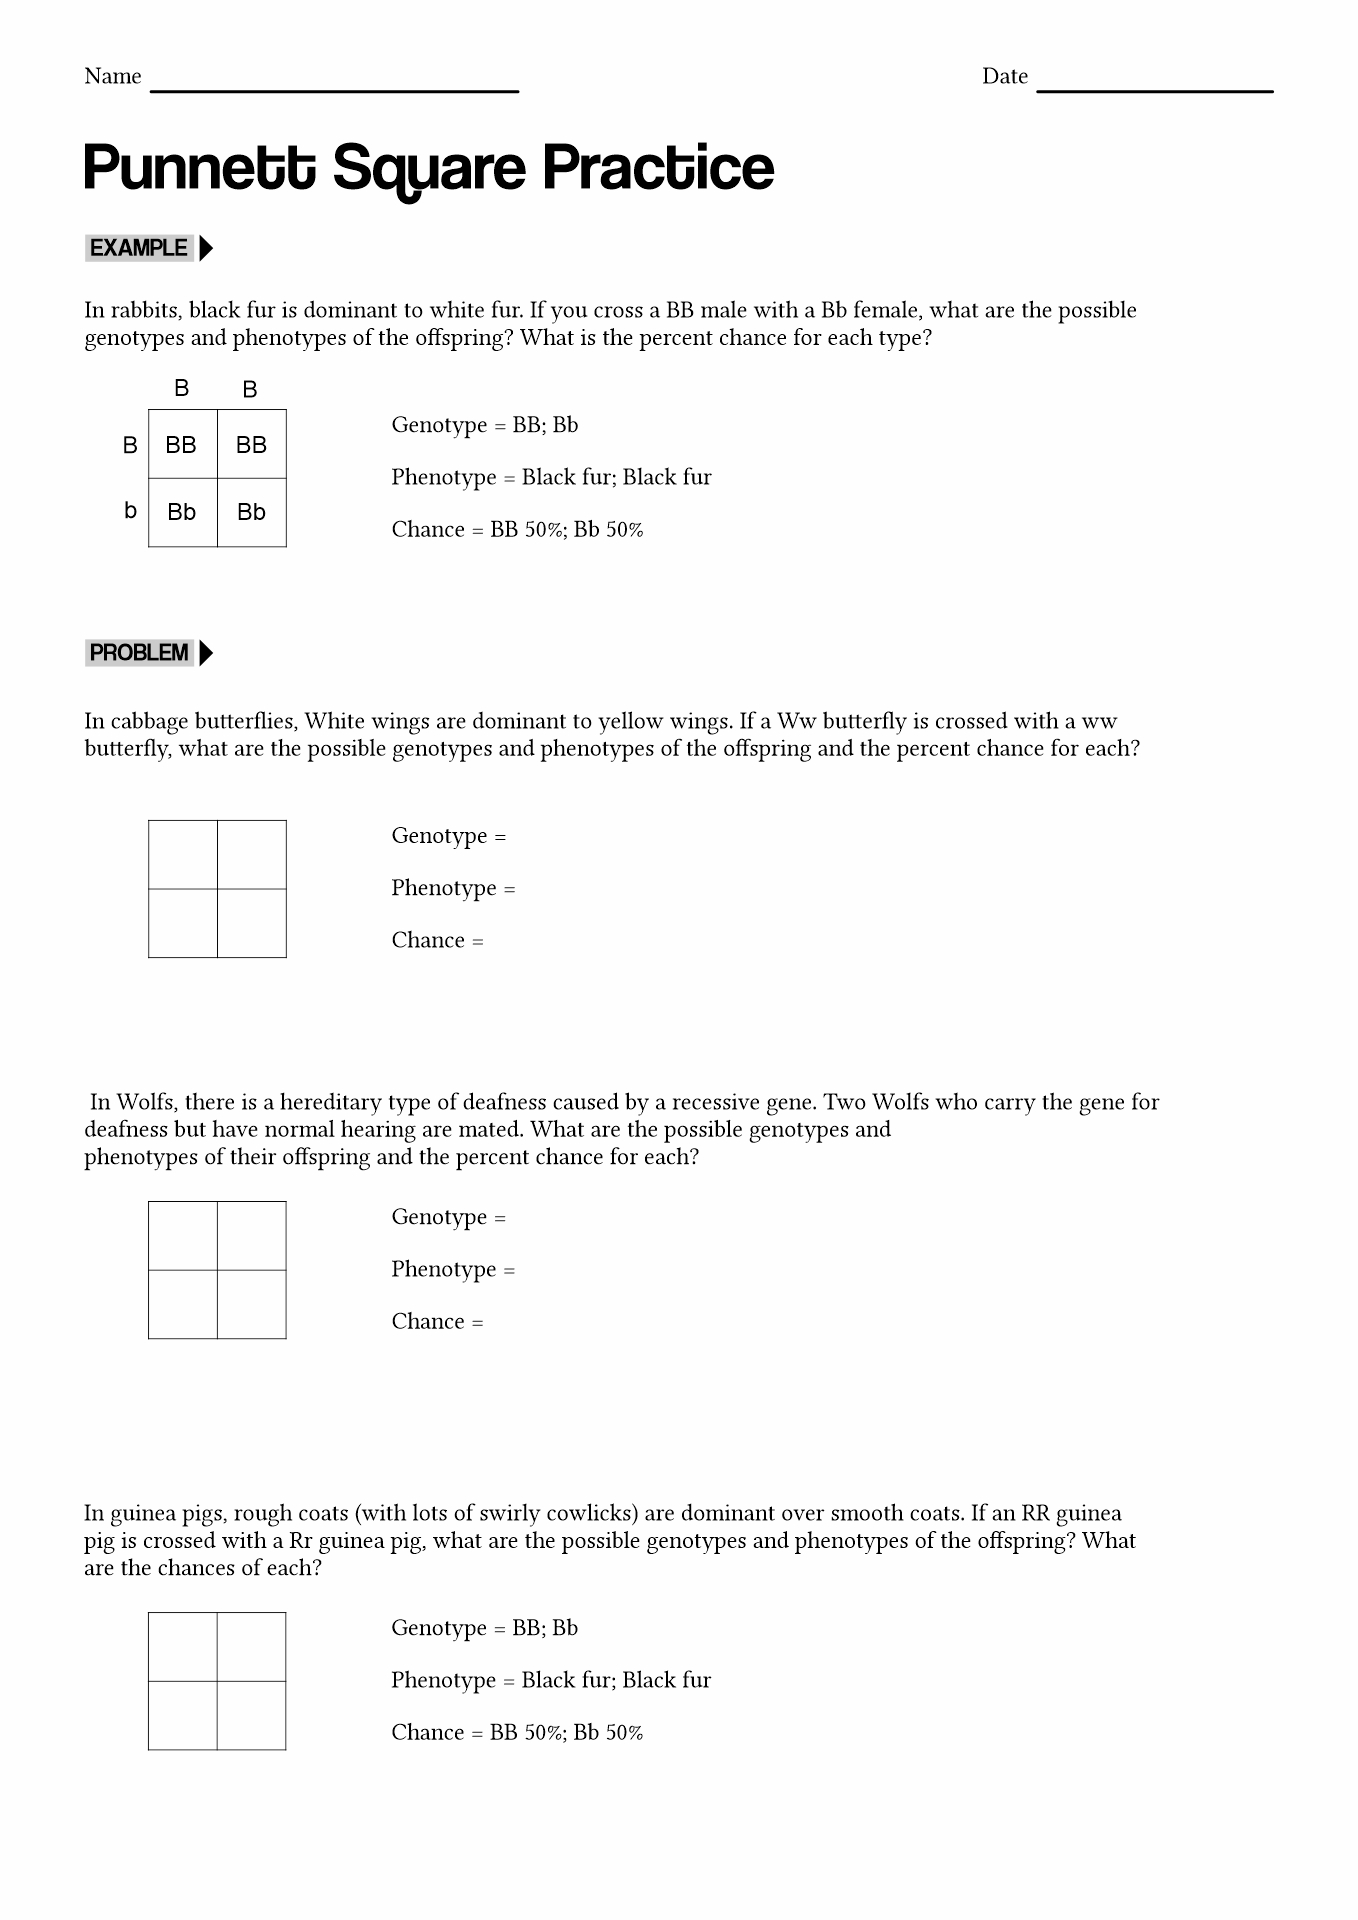 Punnett Square Practice with Answers Image